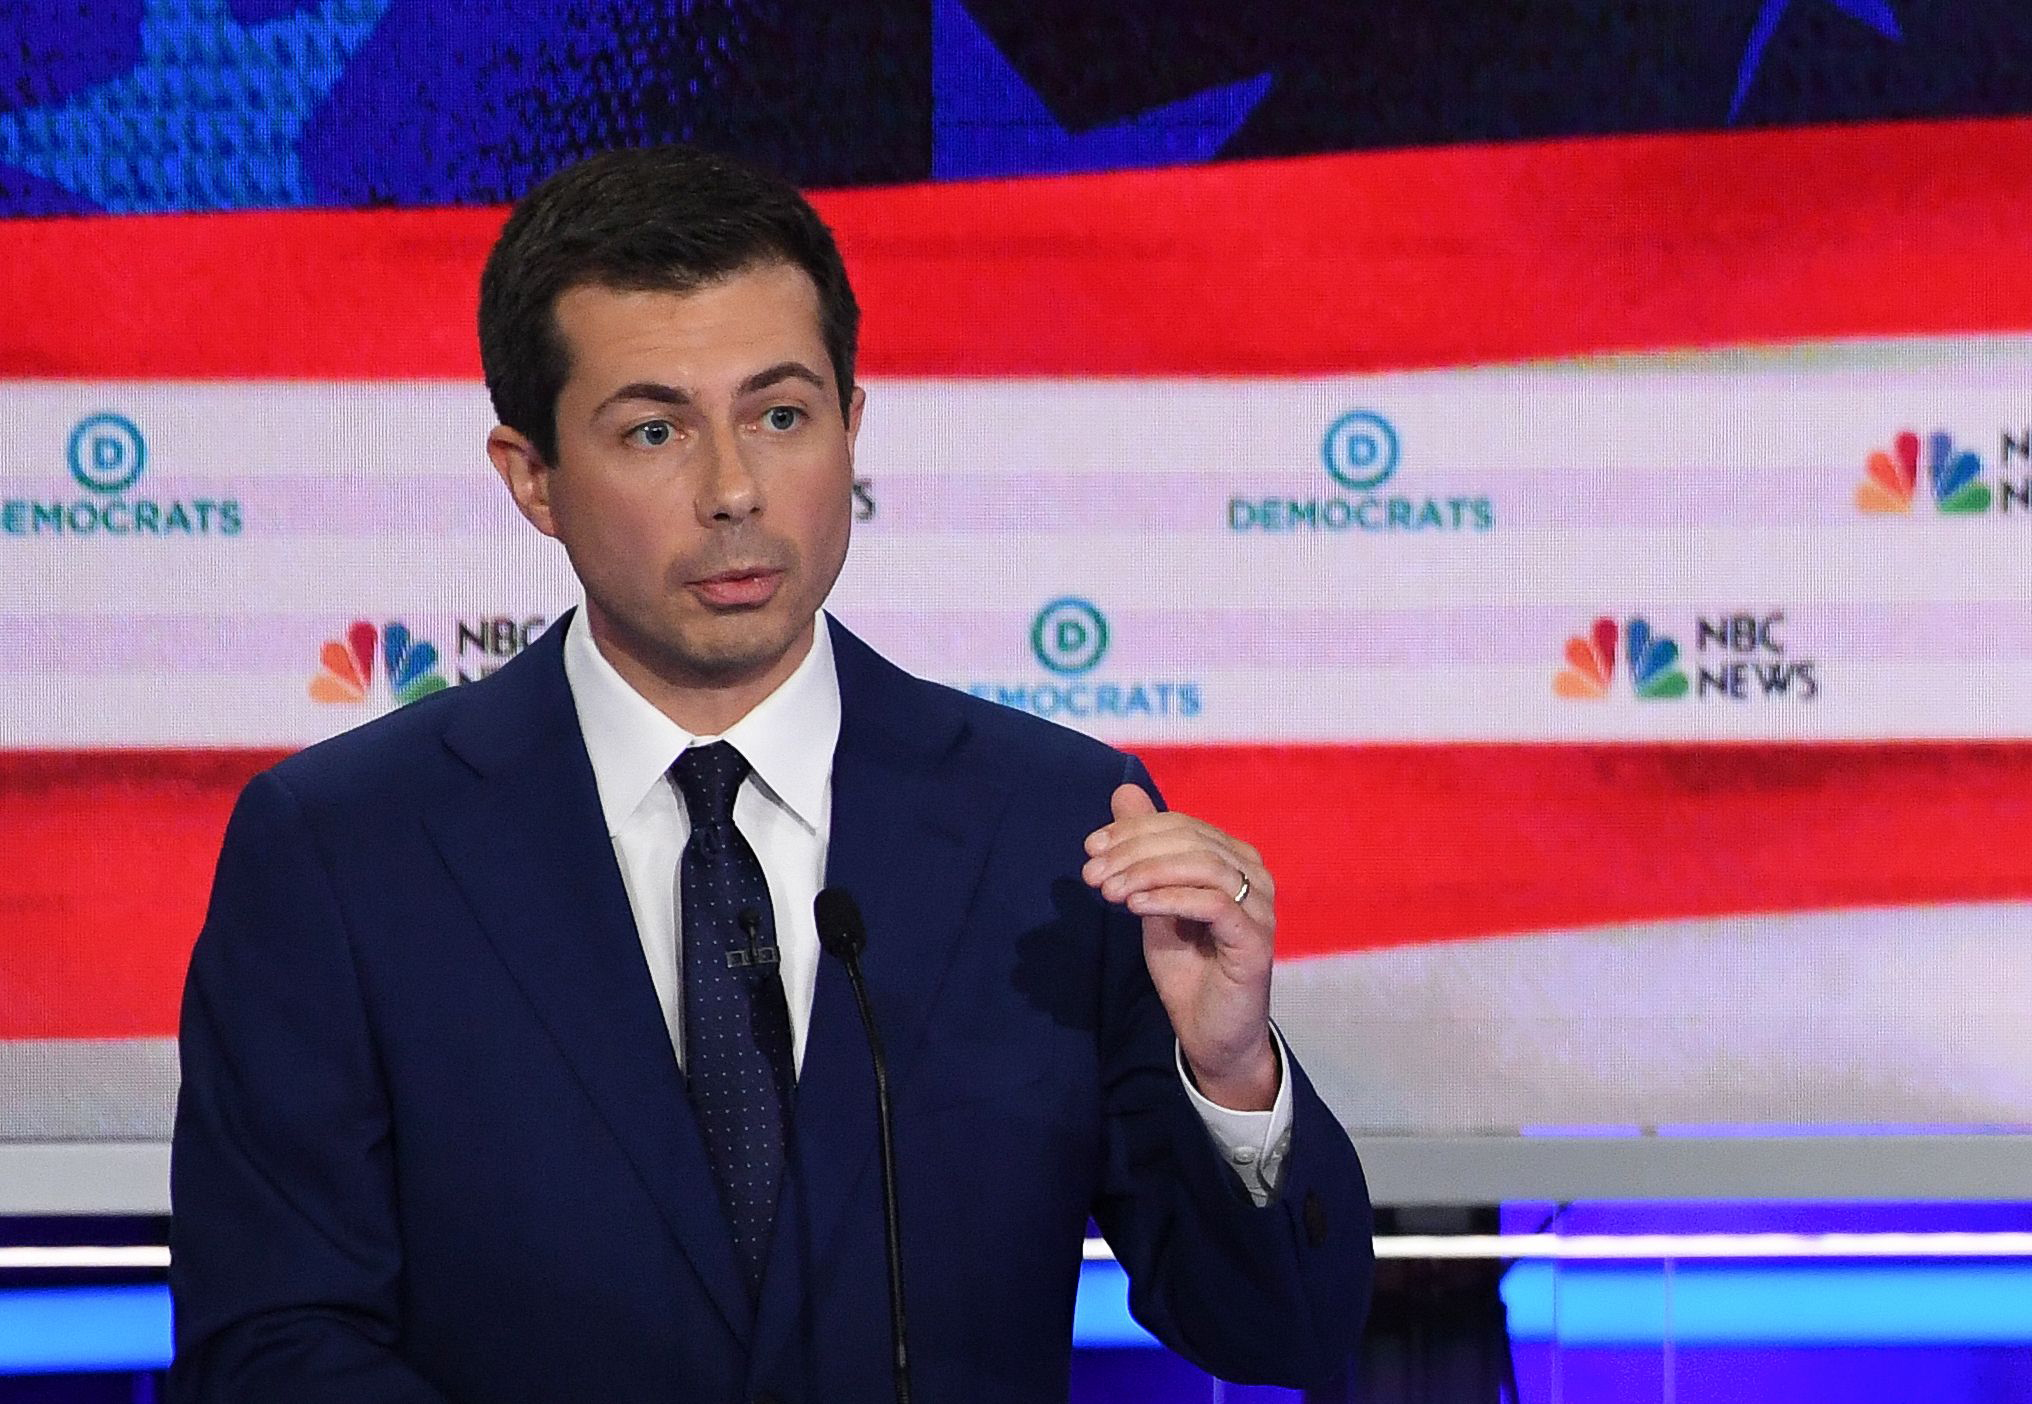 PHOTO: Pete Buttigieg participates in the second night of the first 2020 democratic presidential debate at the Adrienne Arsht Center for the Performing Arts in Miami, June 27, 2019.